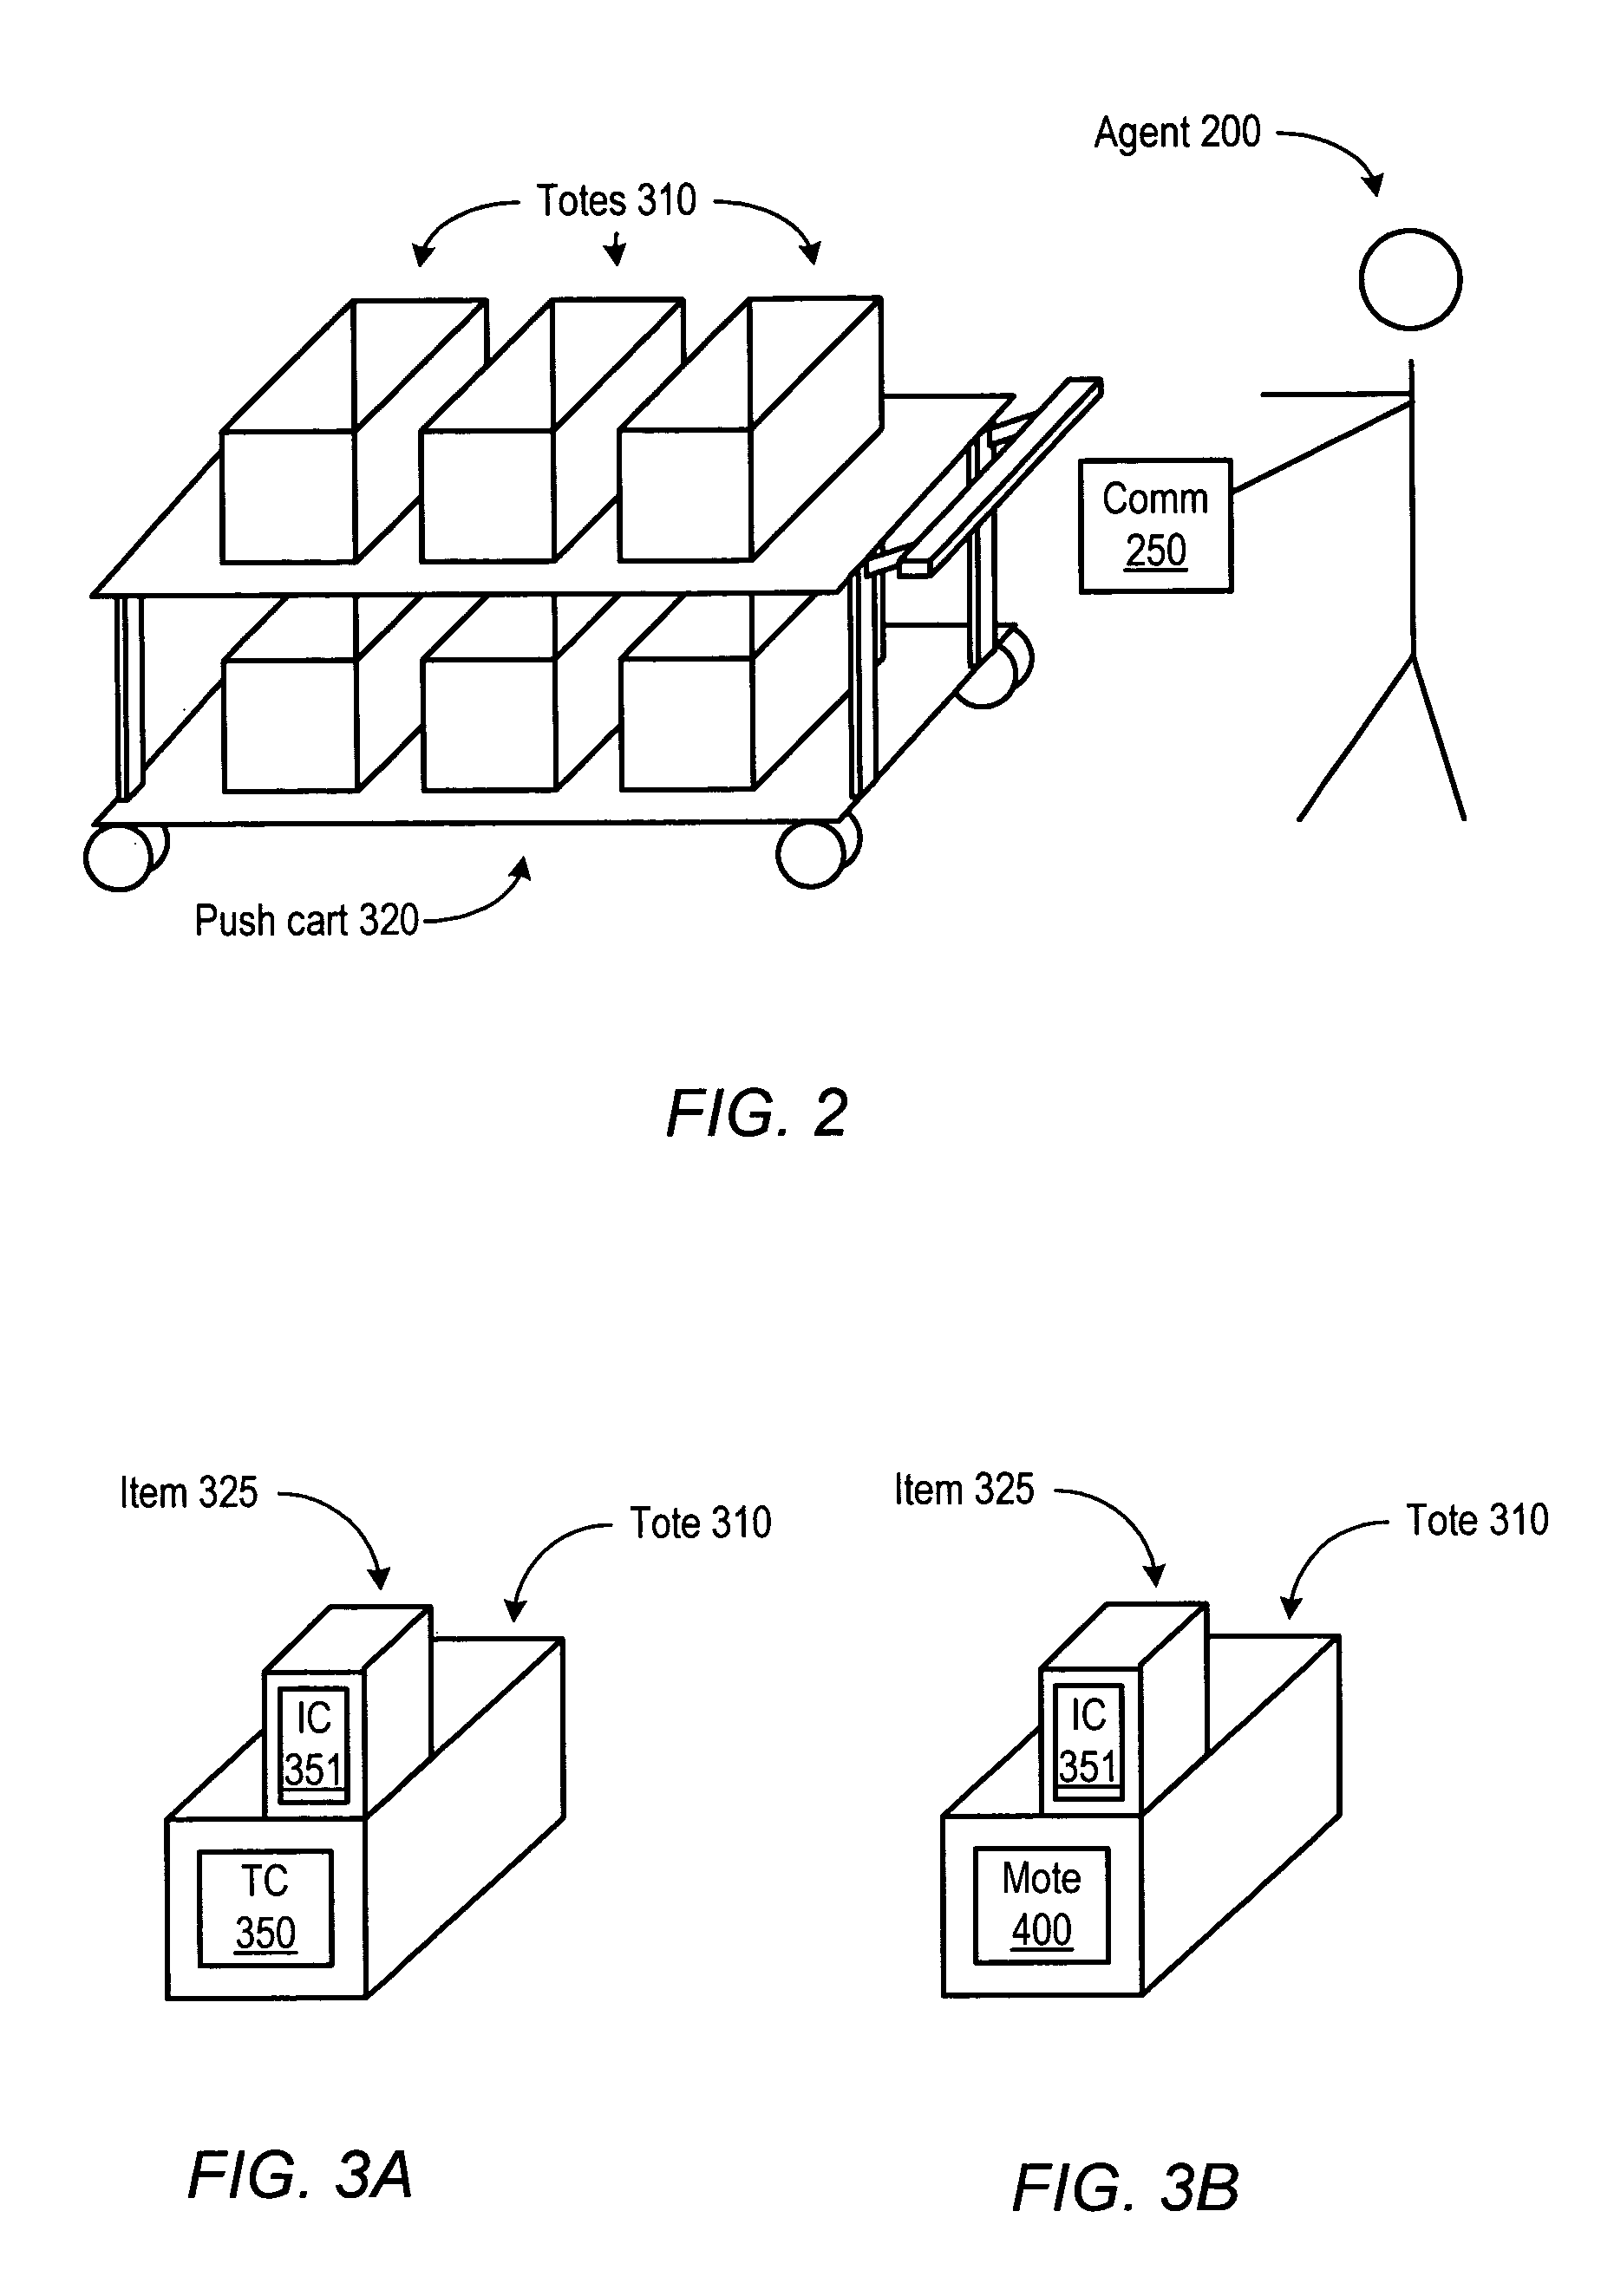 Method and system for agent exchange-based materials handling